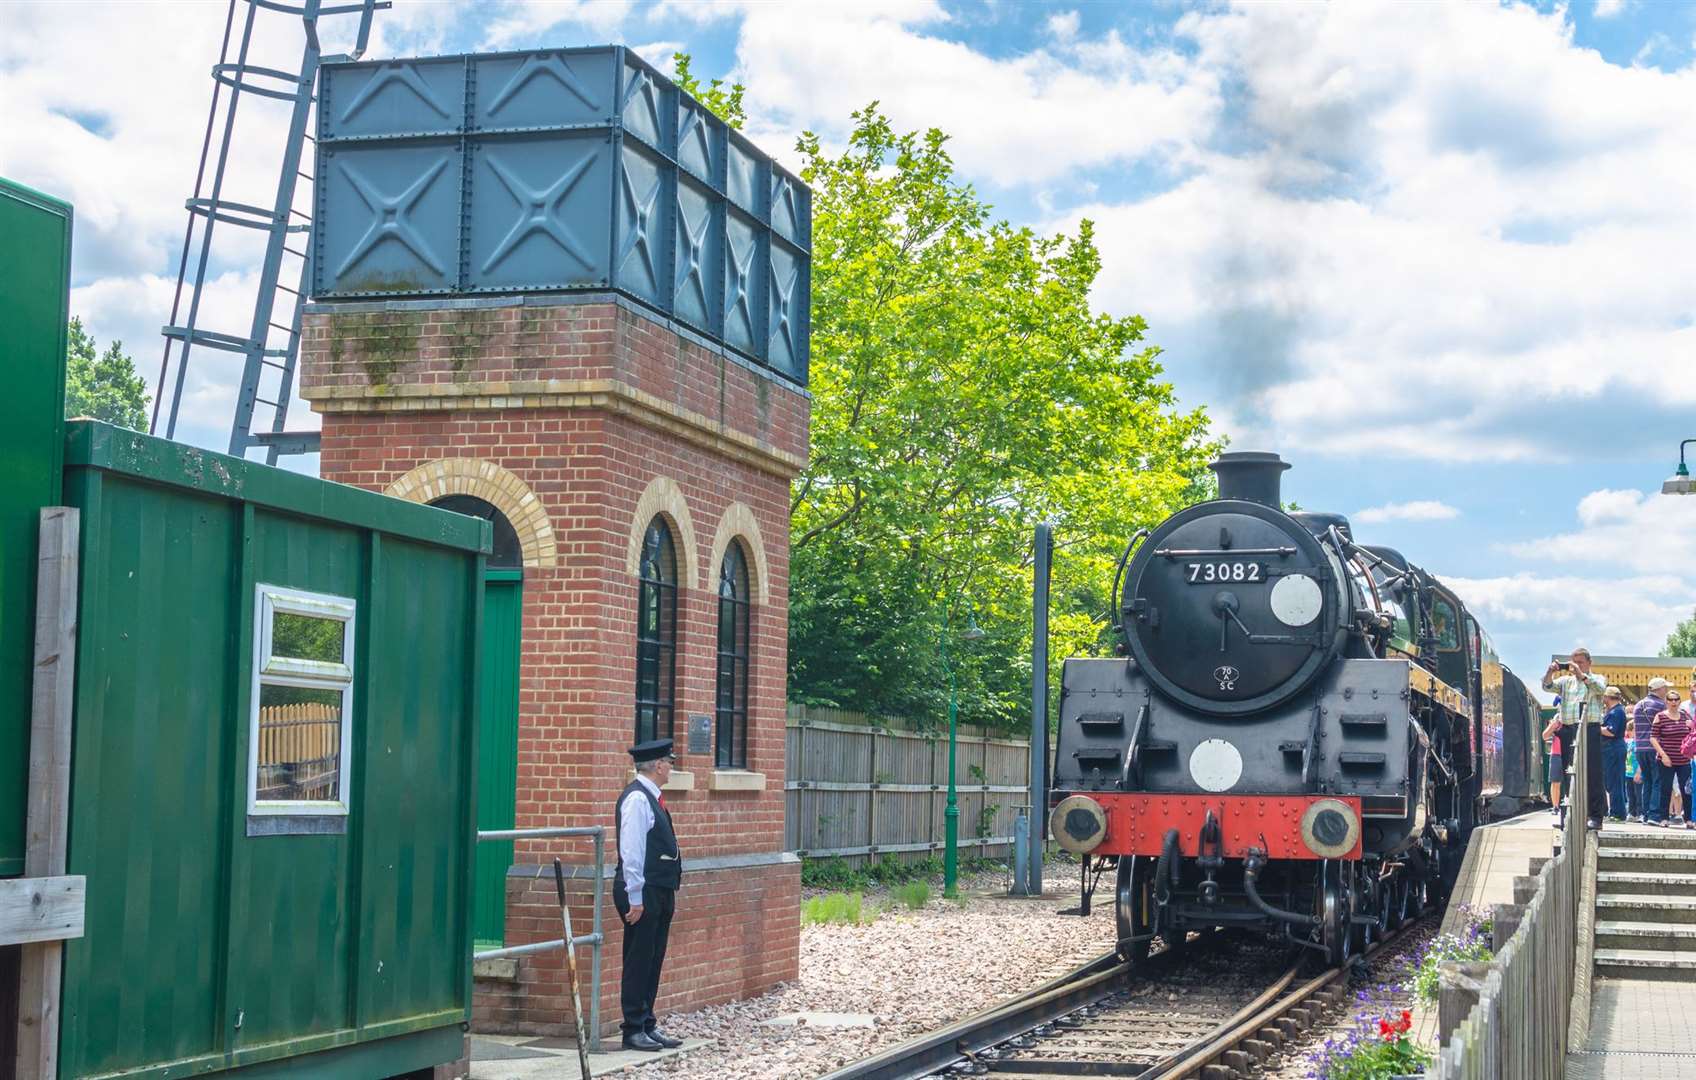 The Bluebell Railway in East Sussex